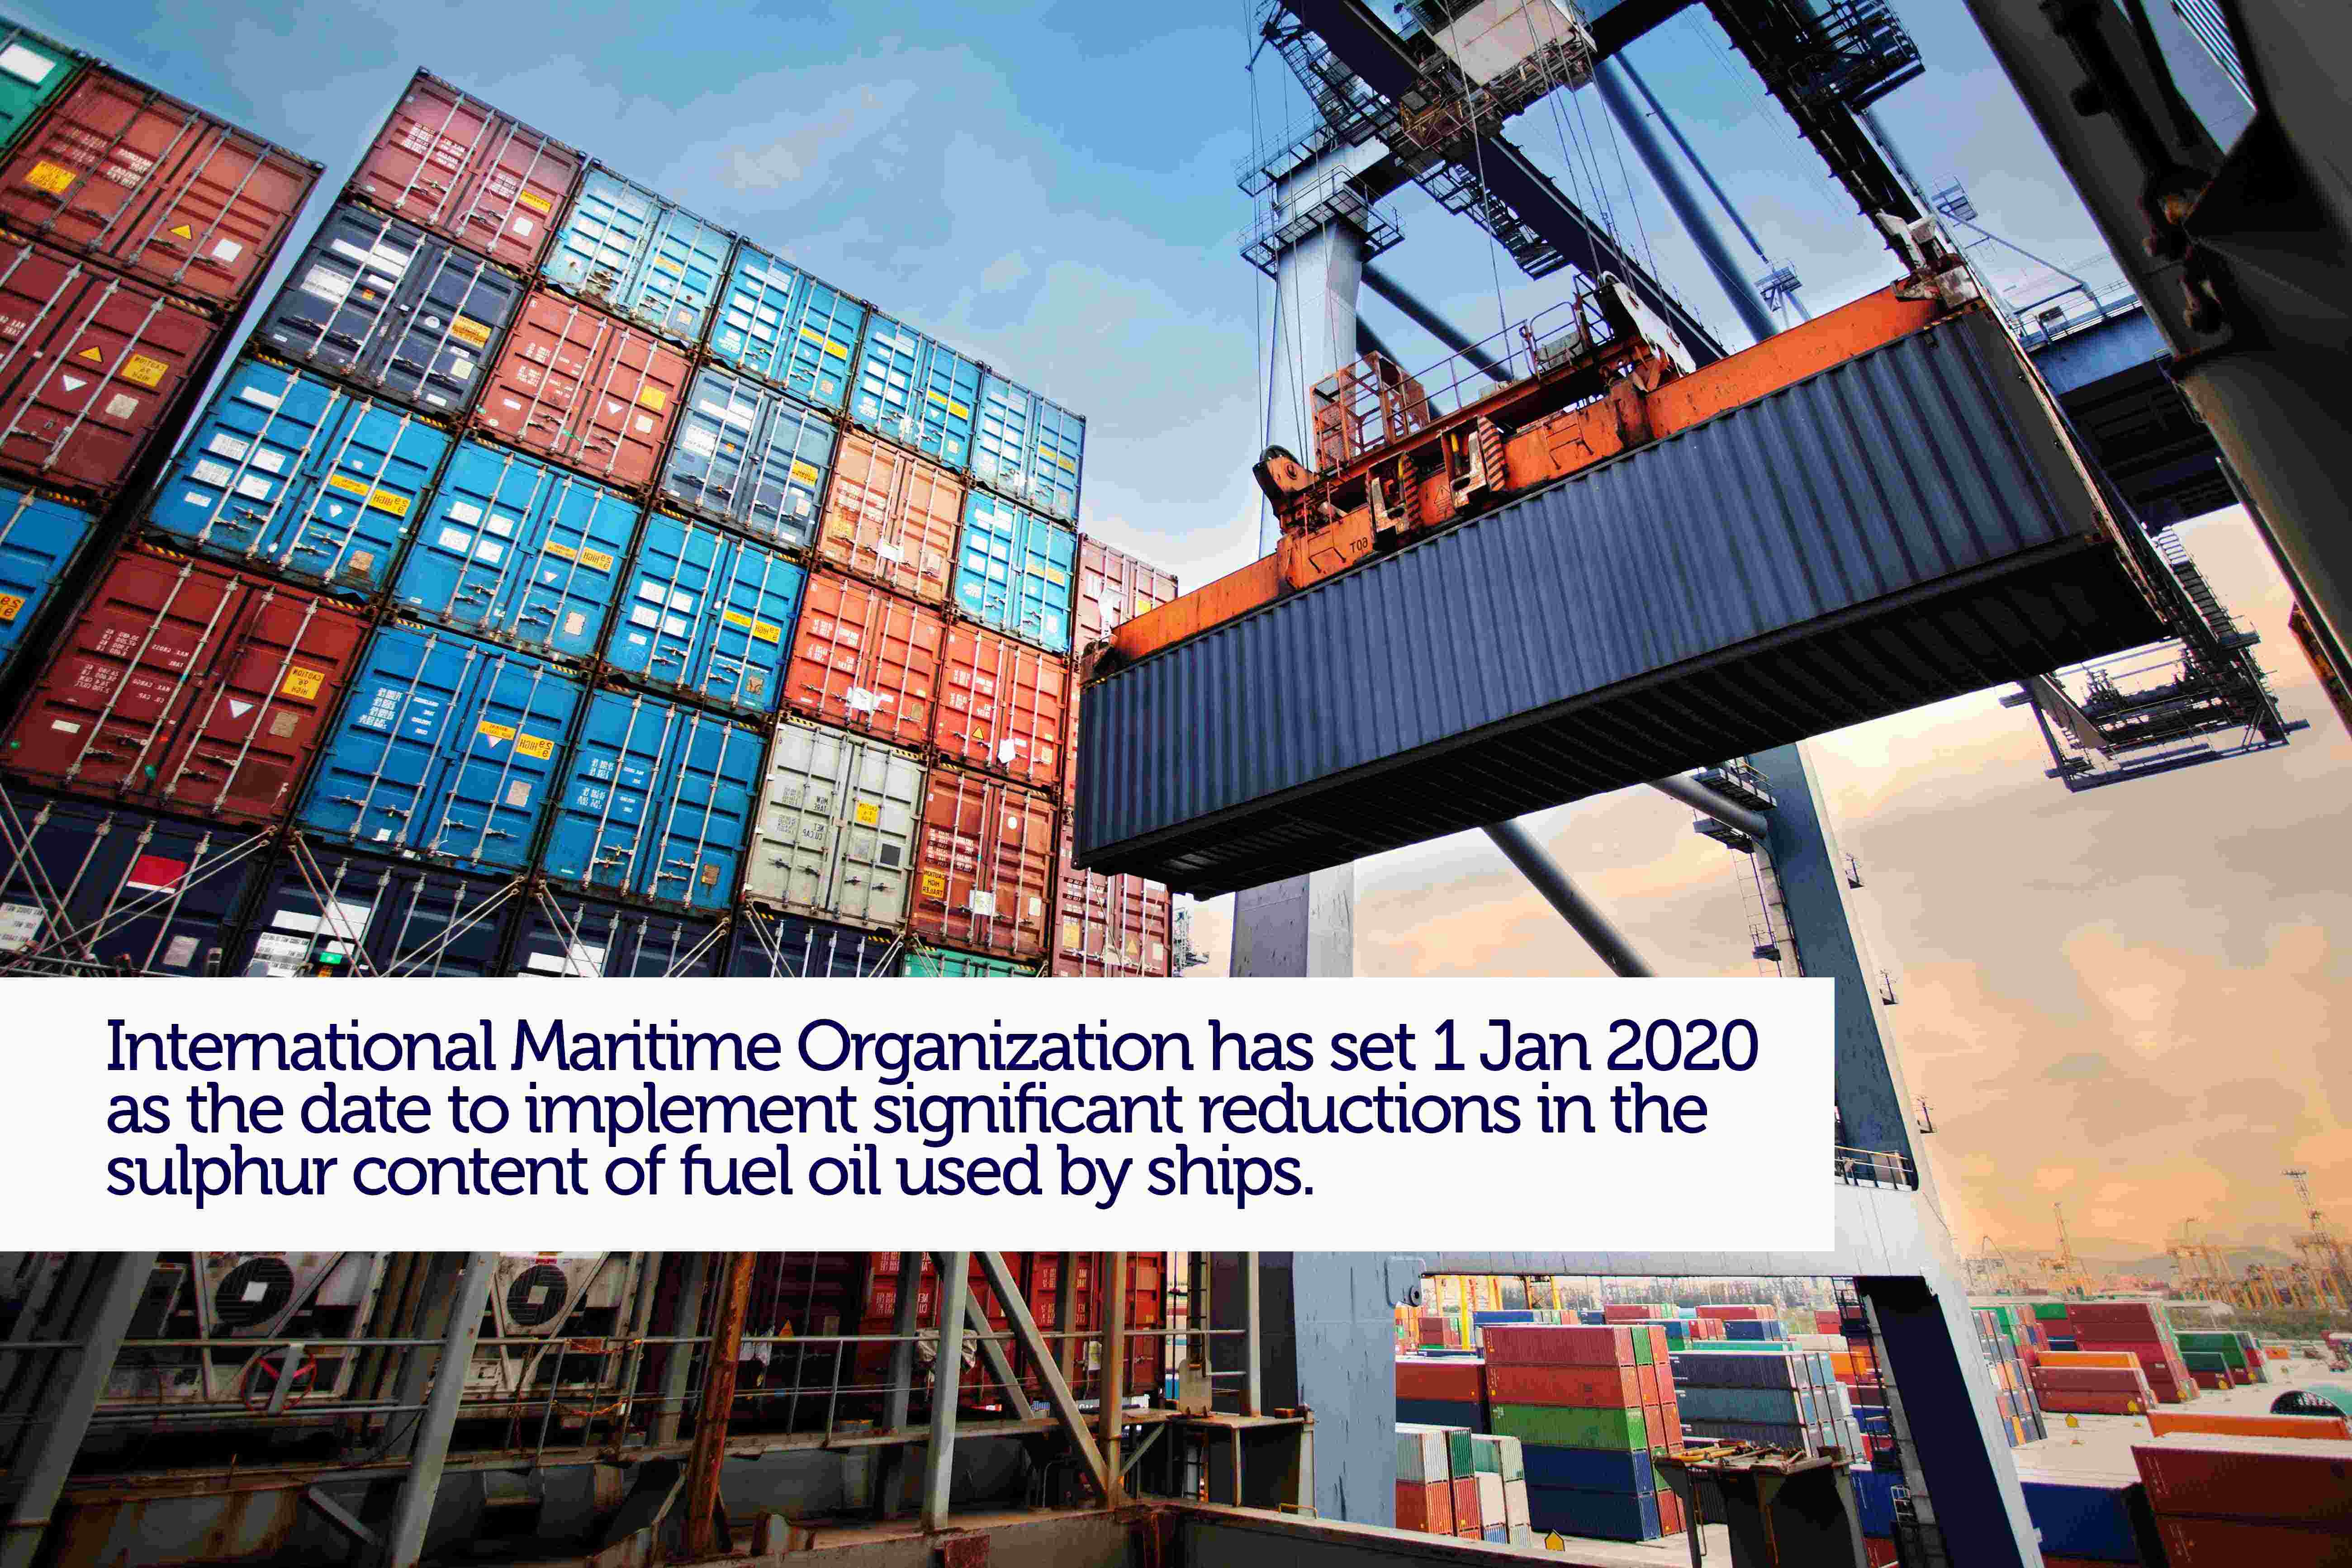 International Maritime Organization has set 1 January 2020 as the date to implement significant reductions in the sulphur content of fuel oil used by ships.